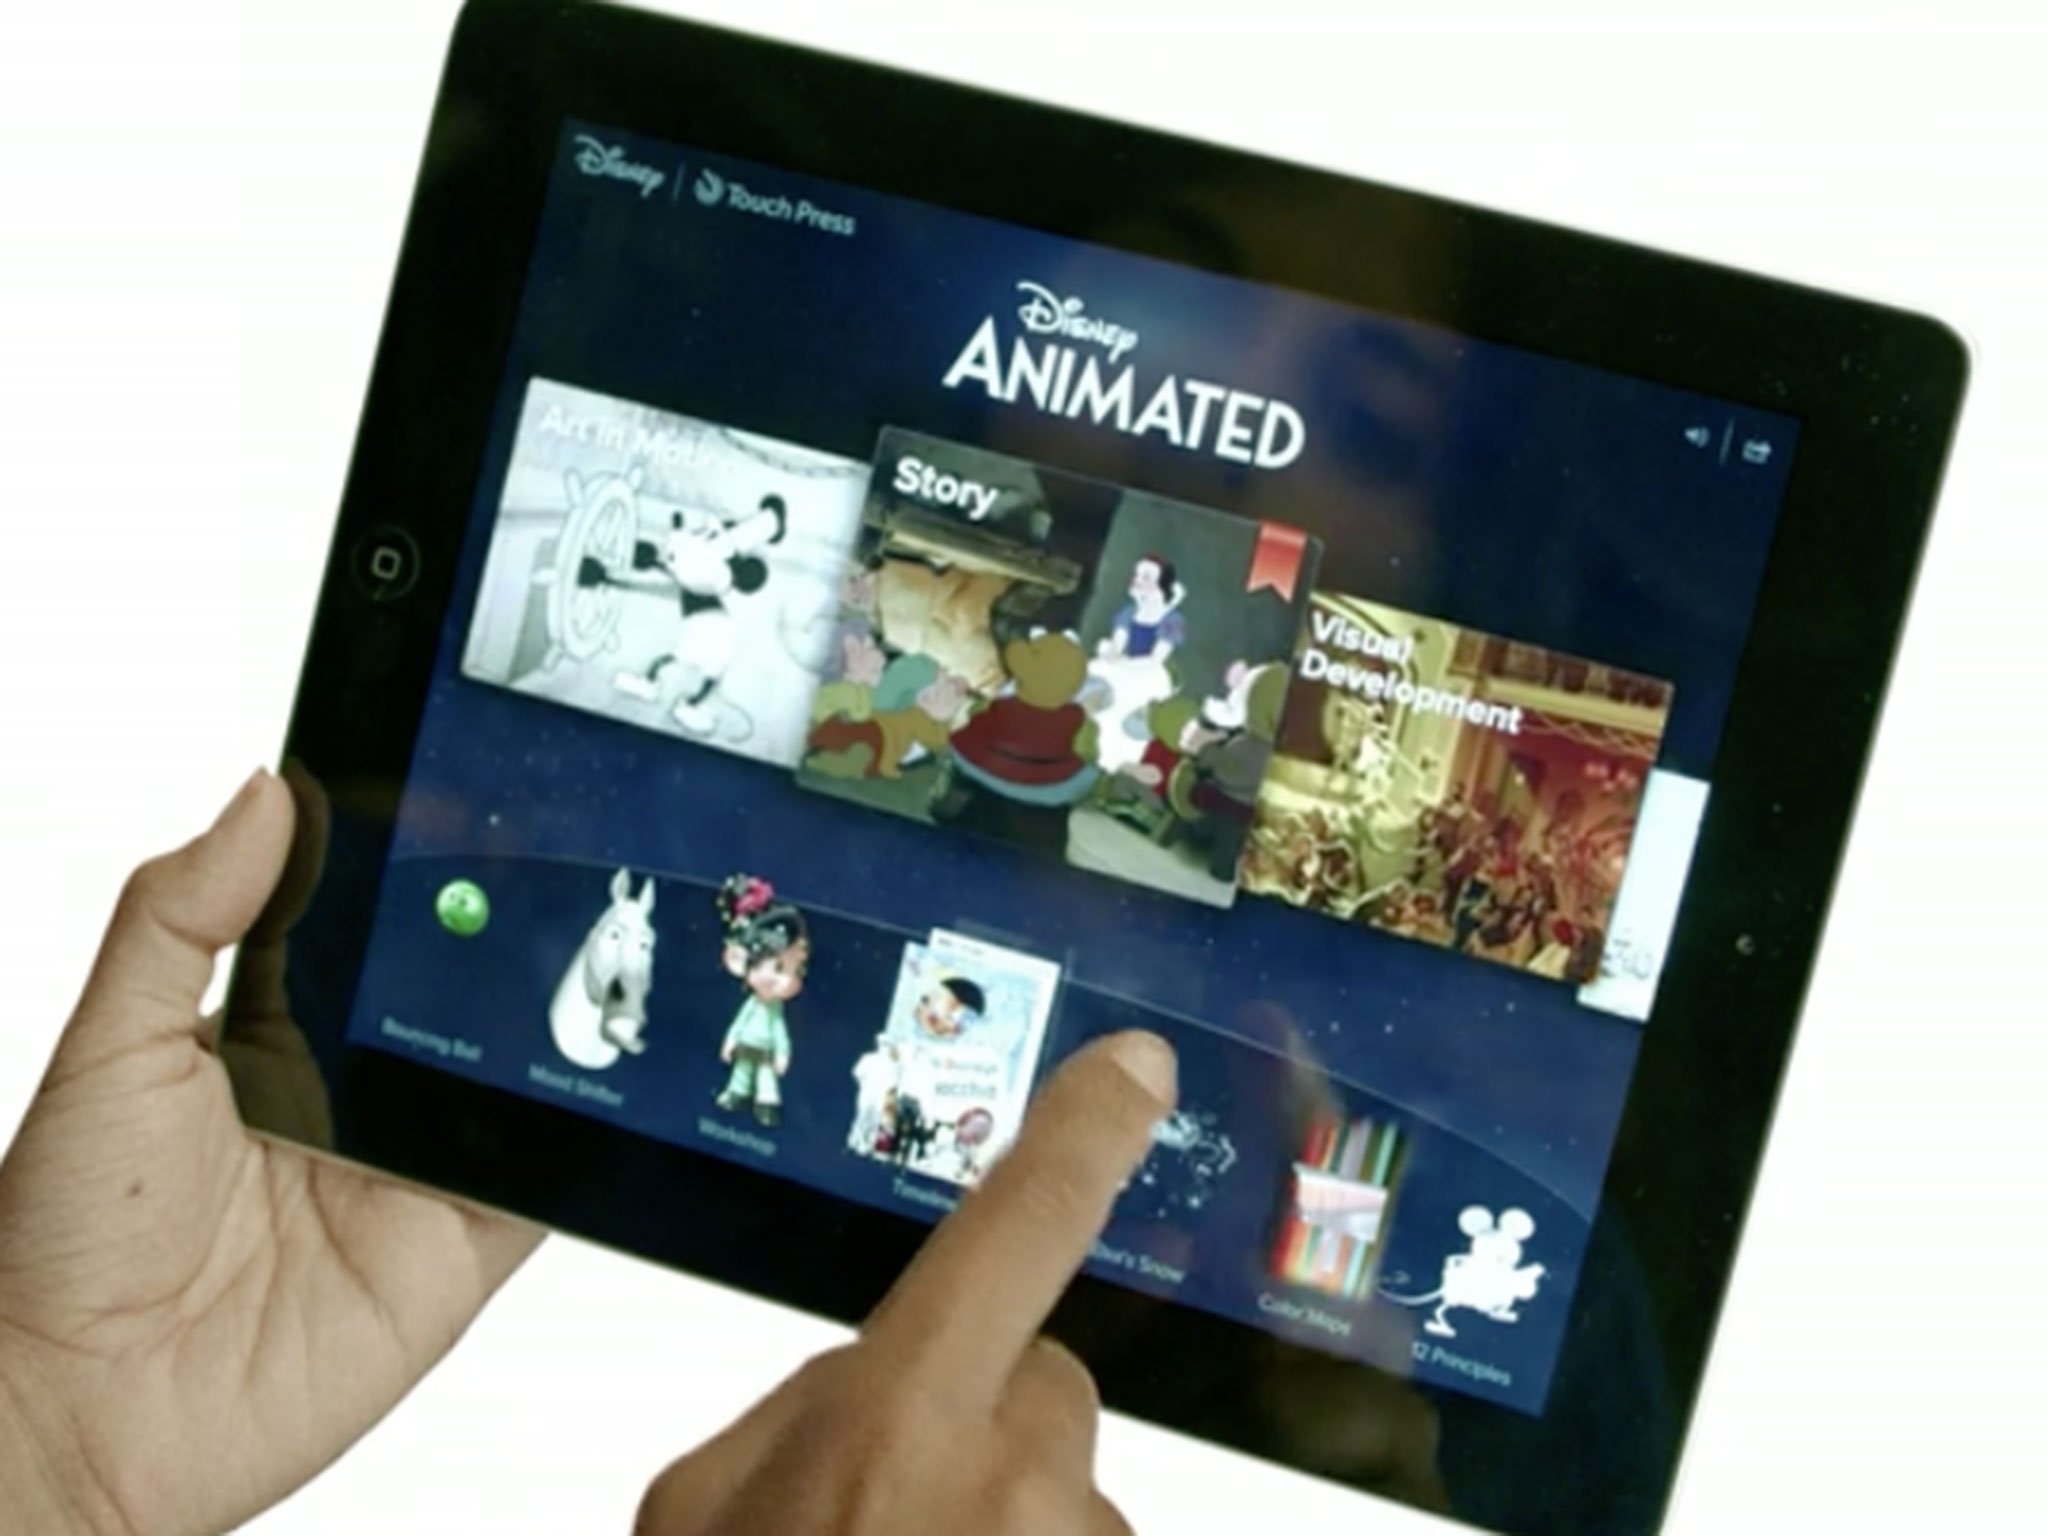 Disney Animated reveals all the magic of the movie kingdom right on your iPad